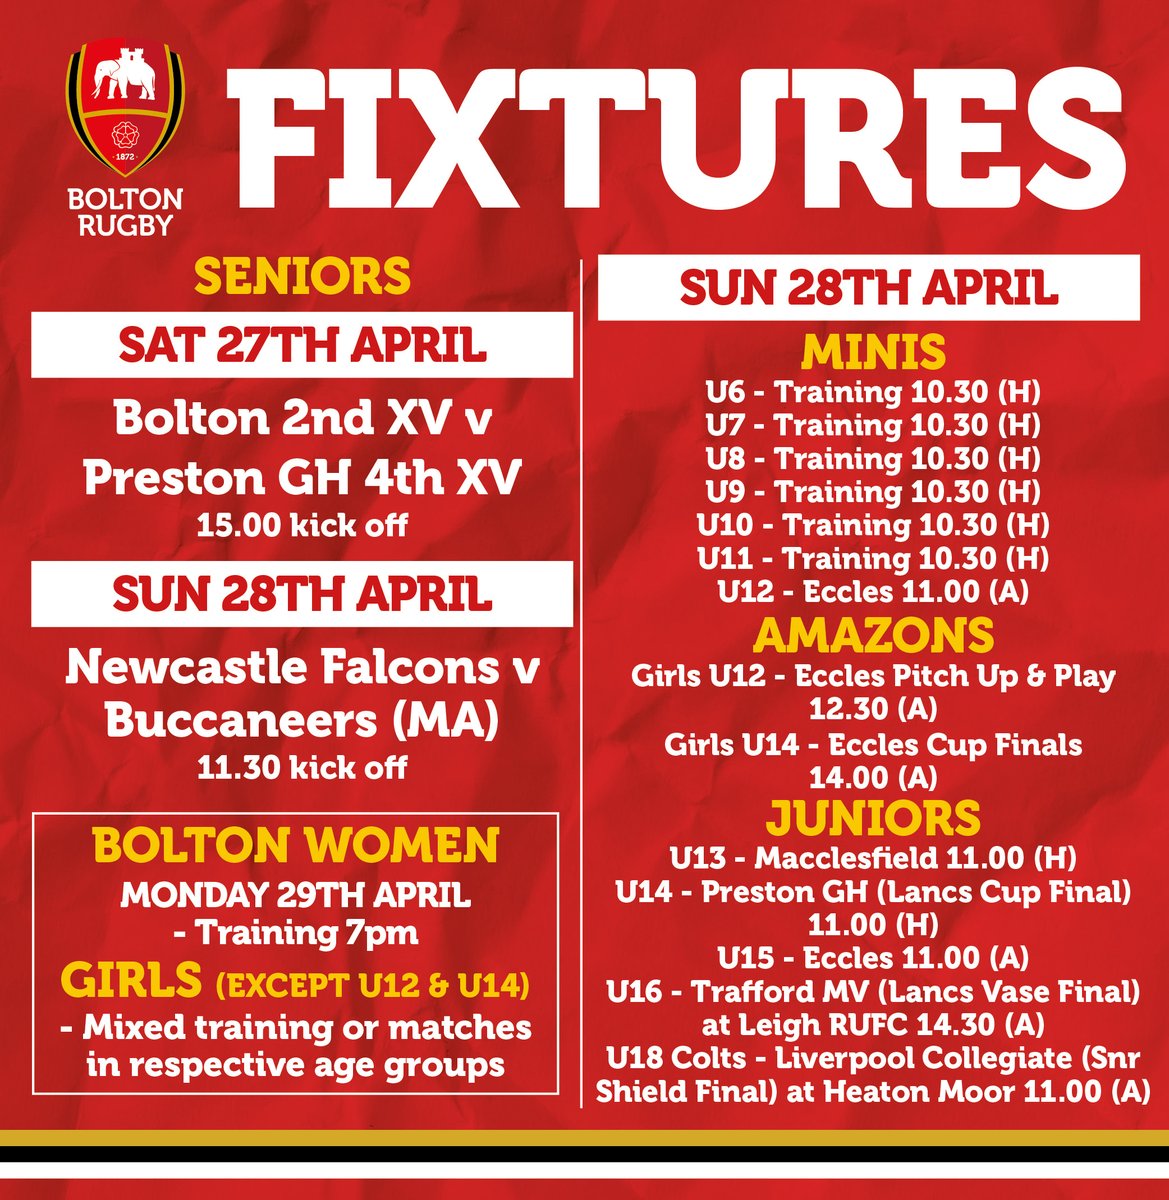 Final fixtures of the season!
On Sat our 2nd XV are at home to @RugbyHoppers. On Sun @BuccaneersMA are travelling to Newcastle to play @FalconsRugby MA & will also be playing at half time during @FalconsRugby v @SaleSharksRugby 
Good luck to all our juniors playing in cup finals!